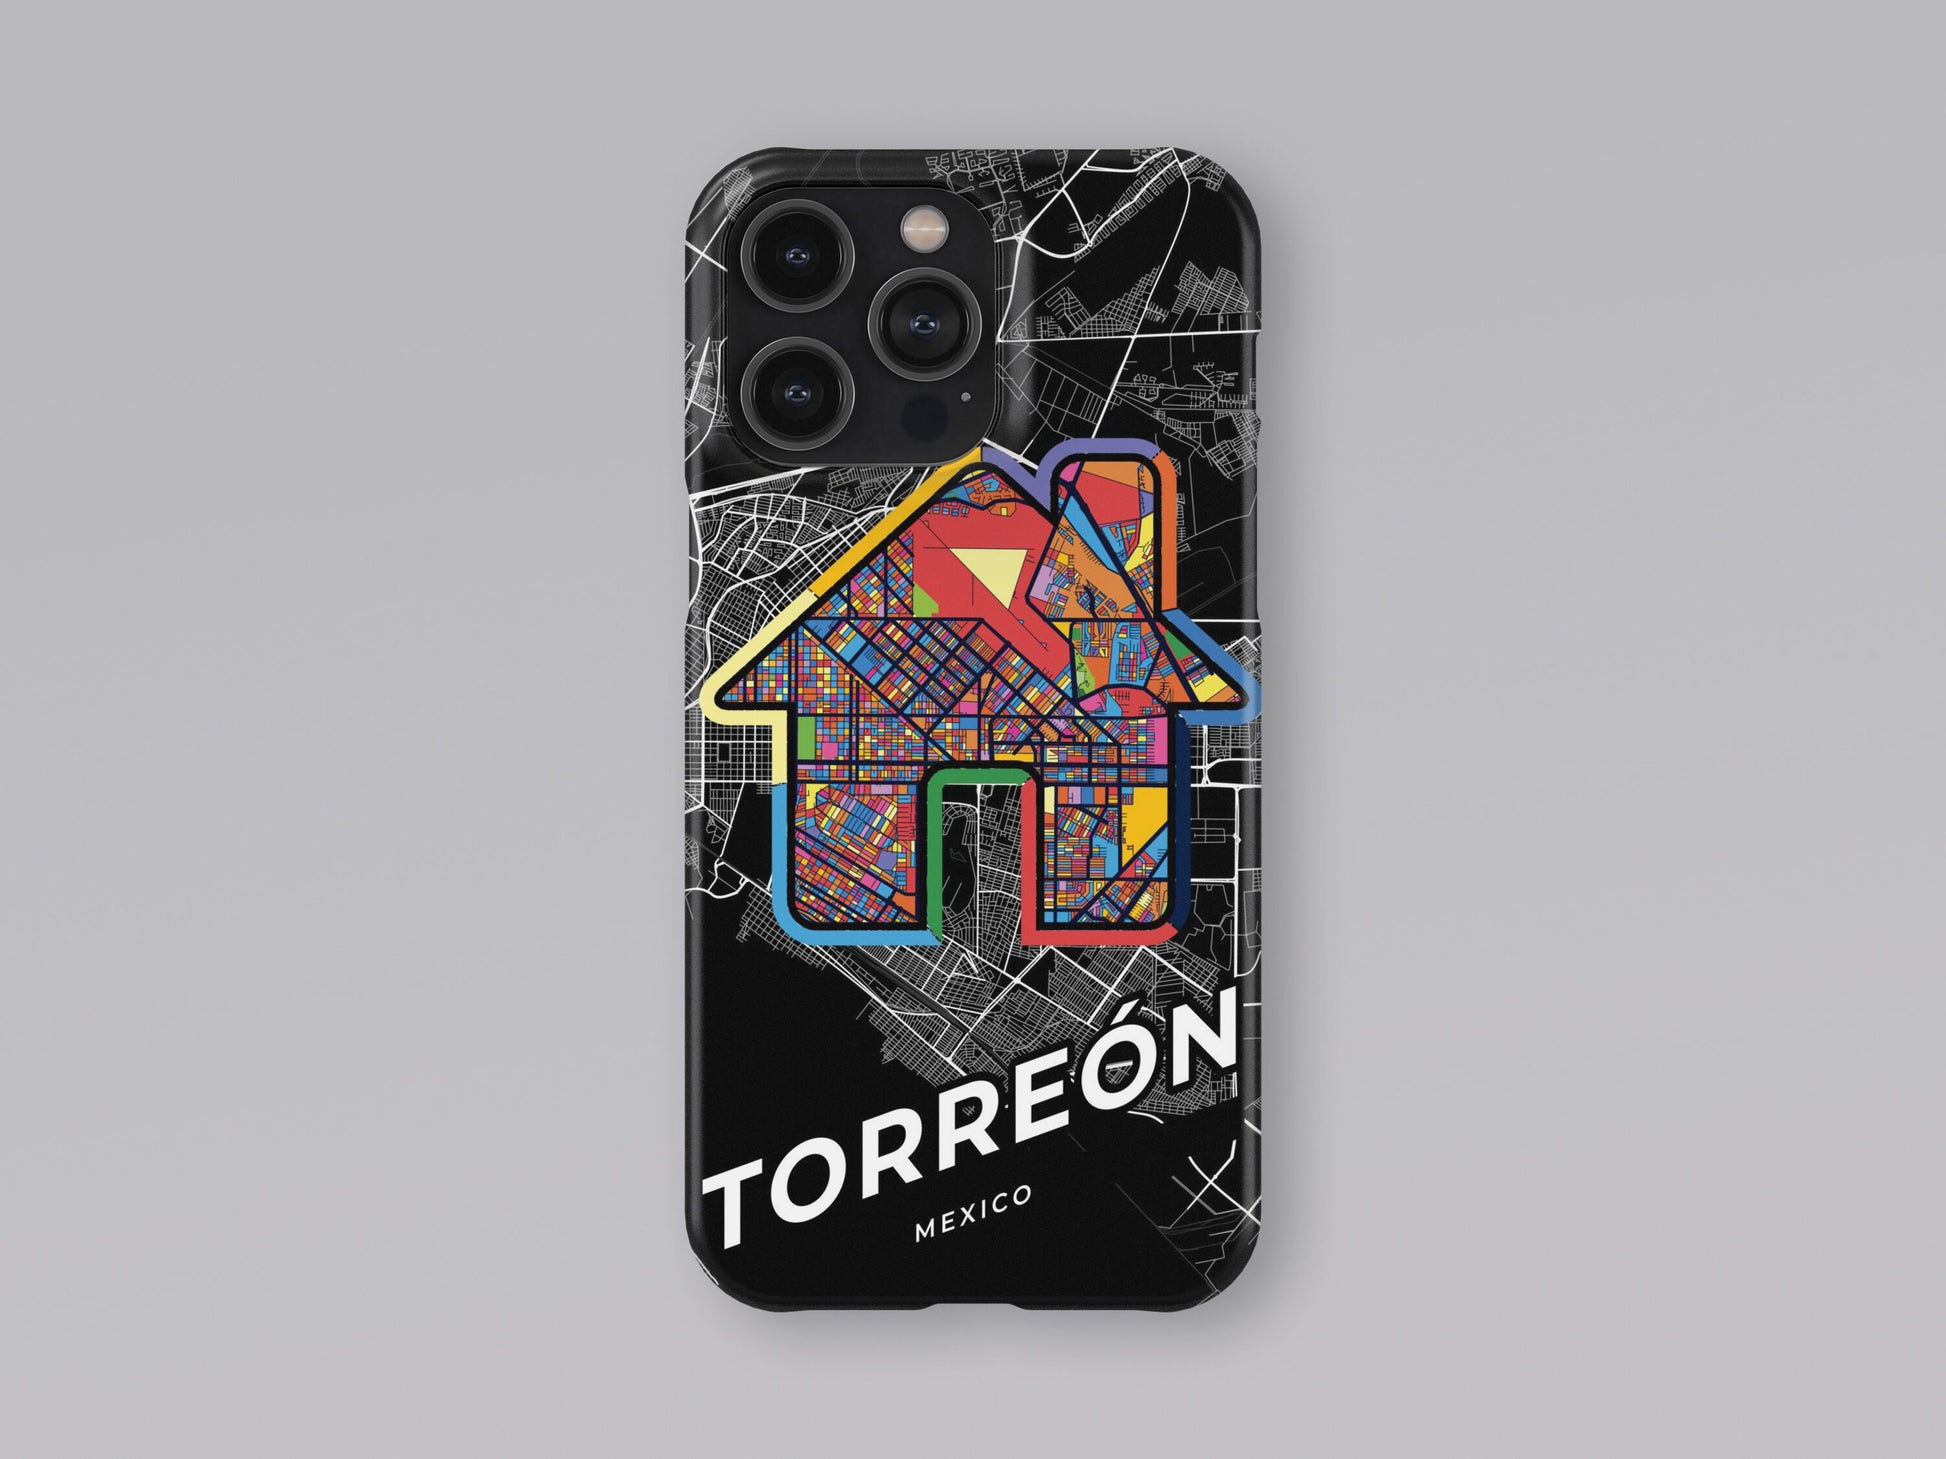 Torreón Mexico slim phone case with colorful icon 3